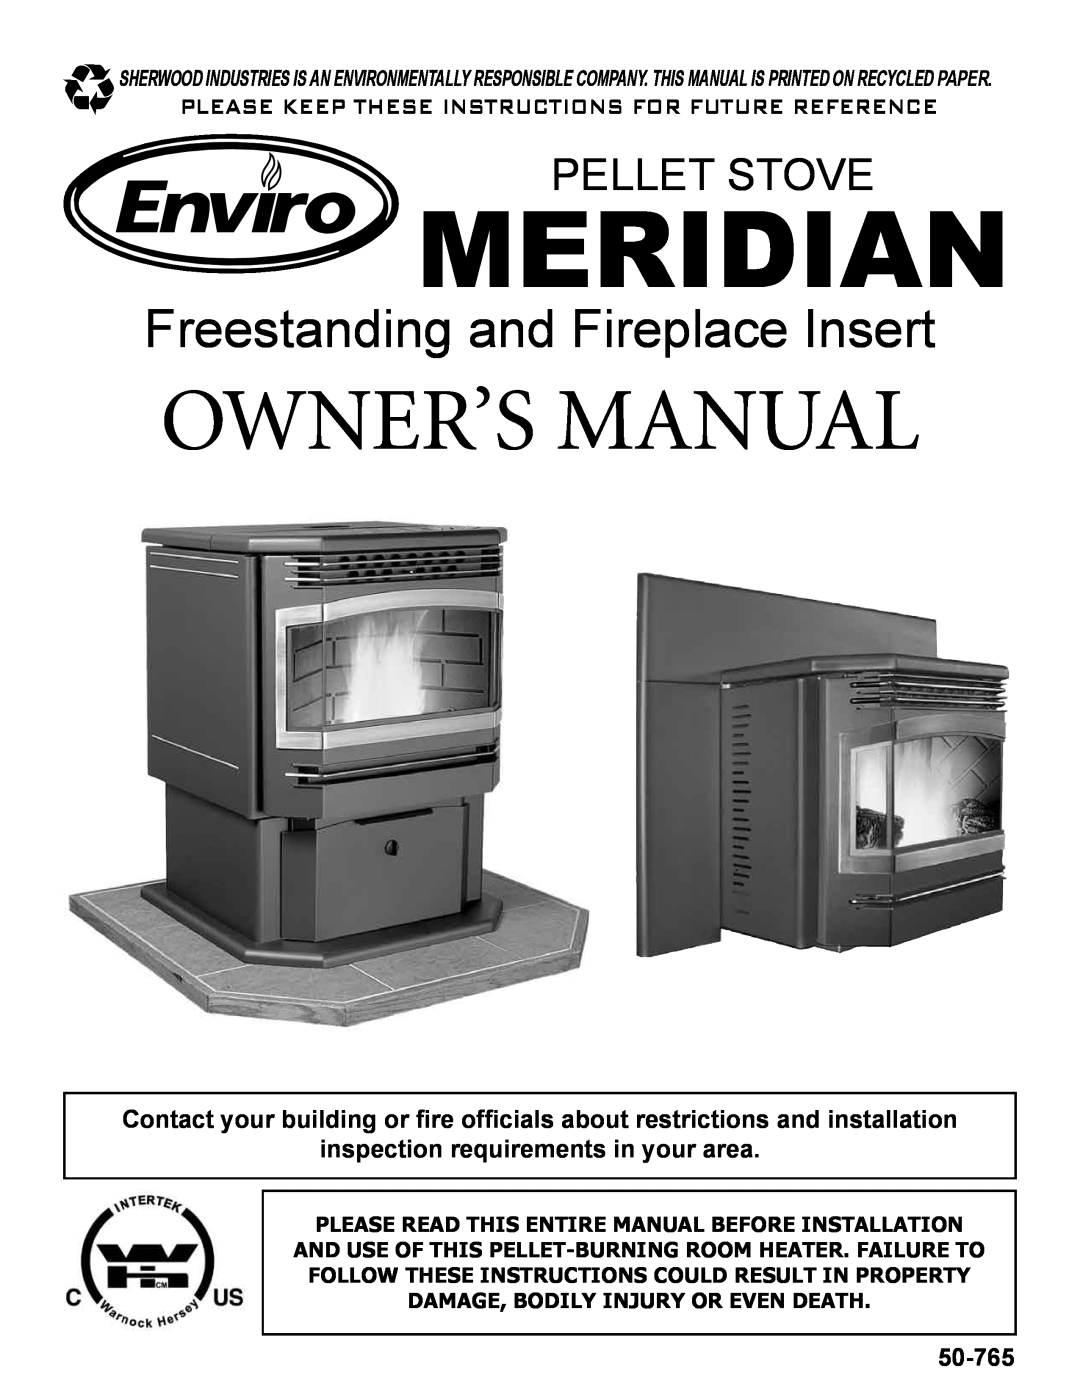 Enviro Meridian owner manual Damage, Bodily Injury Or Even Death, Freestanding and Fireplace Insert, Pellet Stove, 50-765 